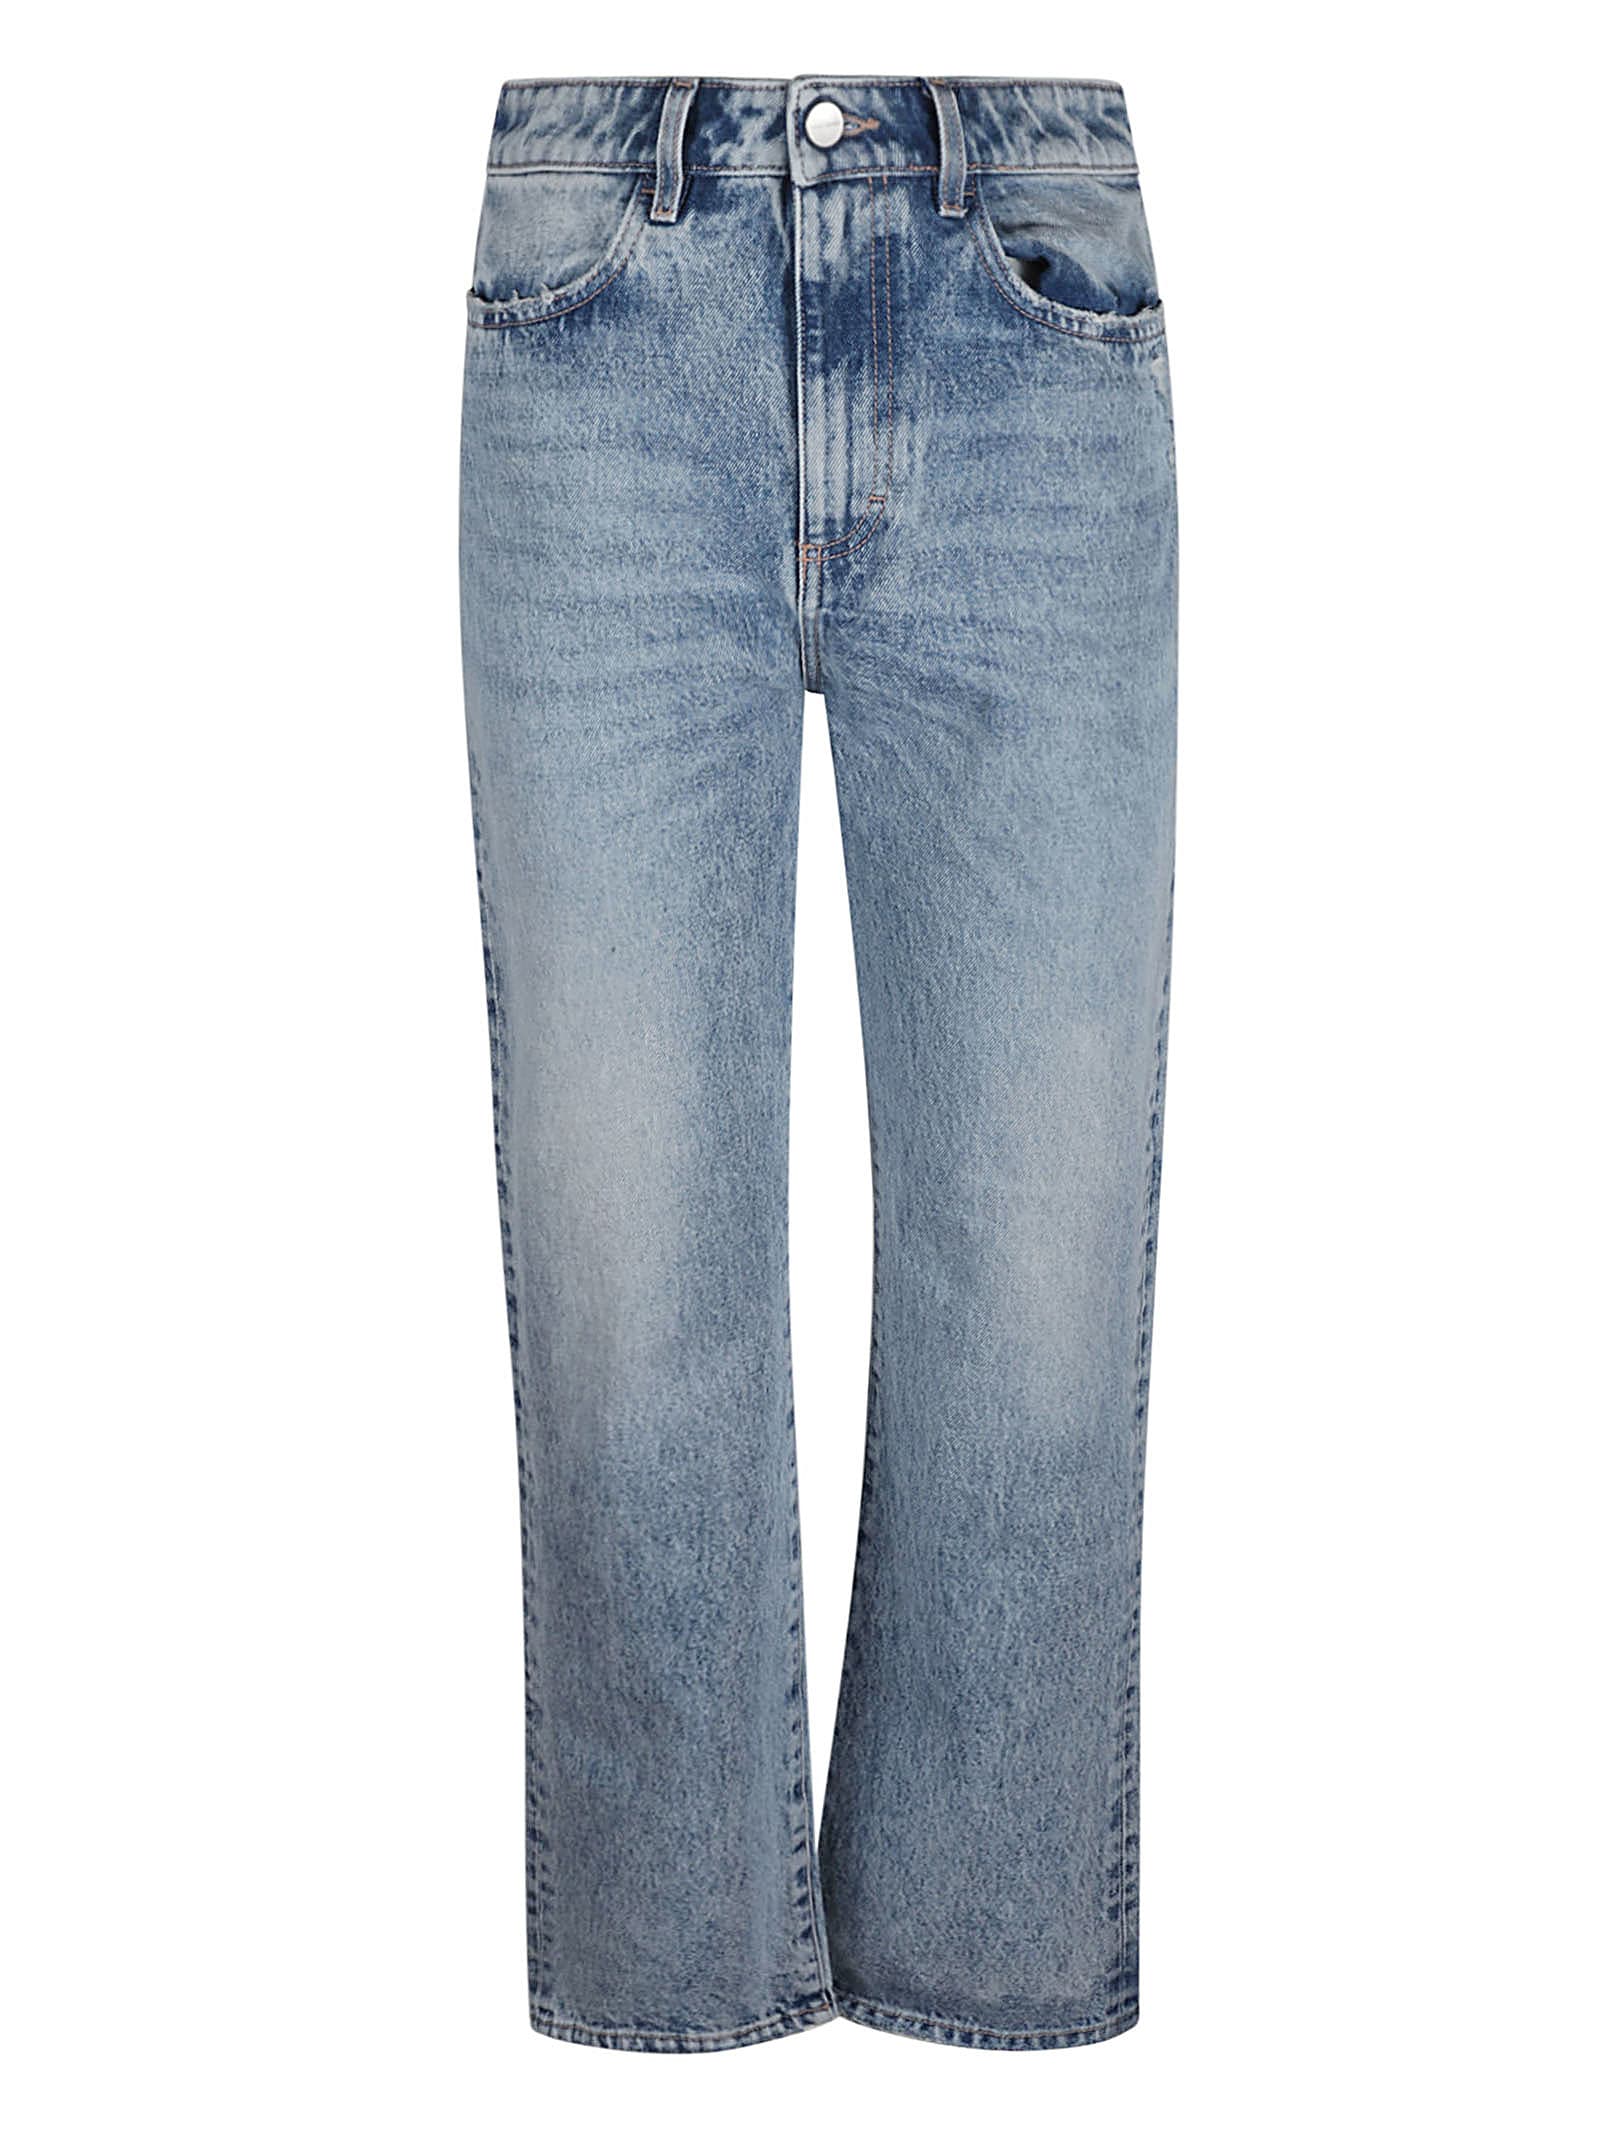 ICON DENIM CLASSIC FITTED BUTTONED JEANS